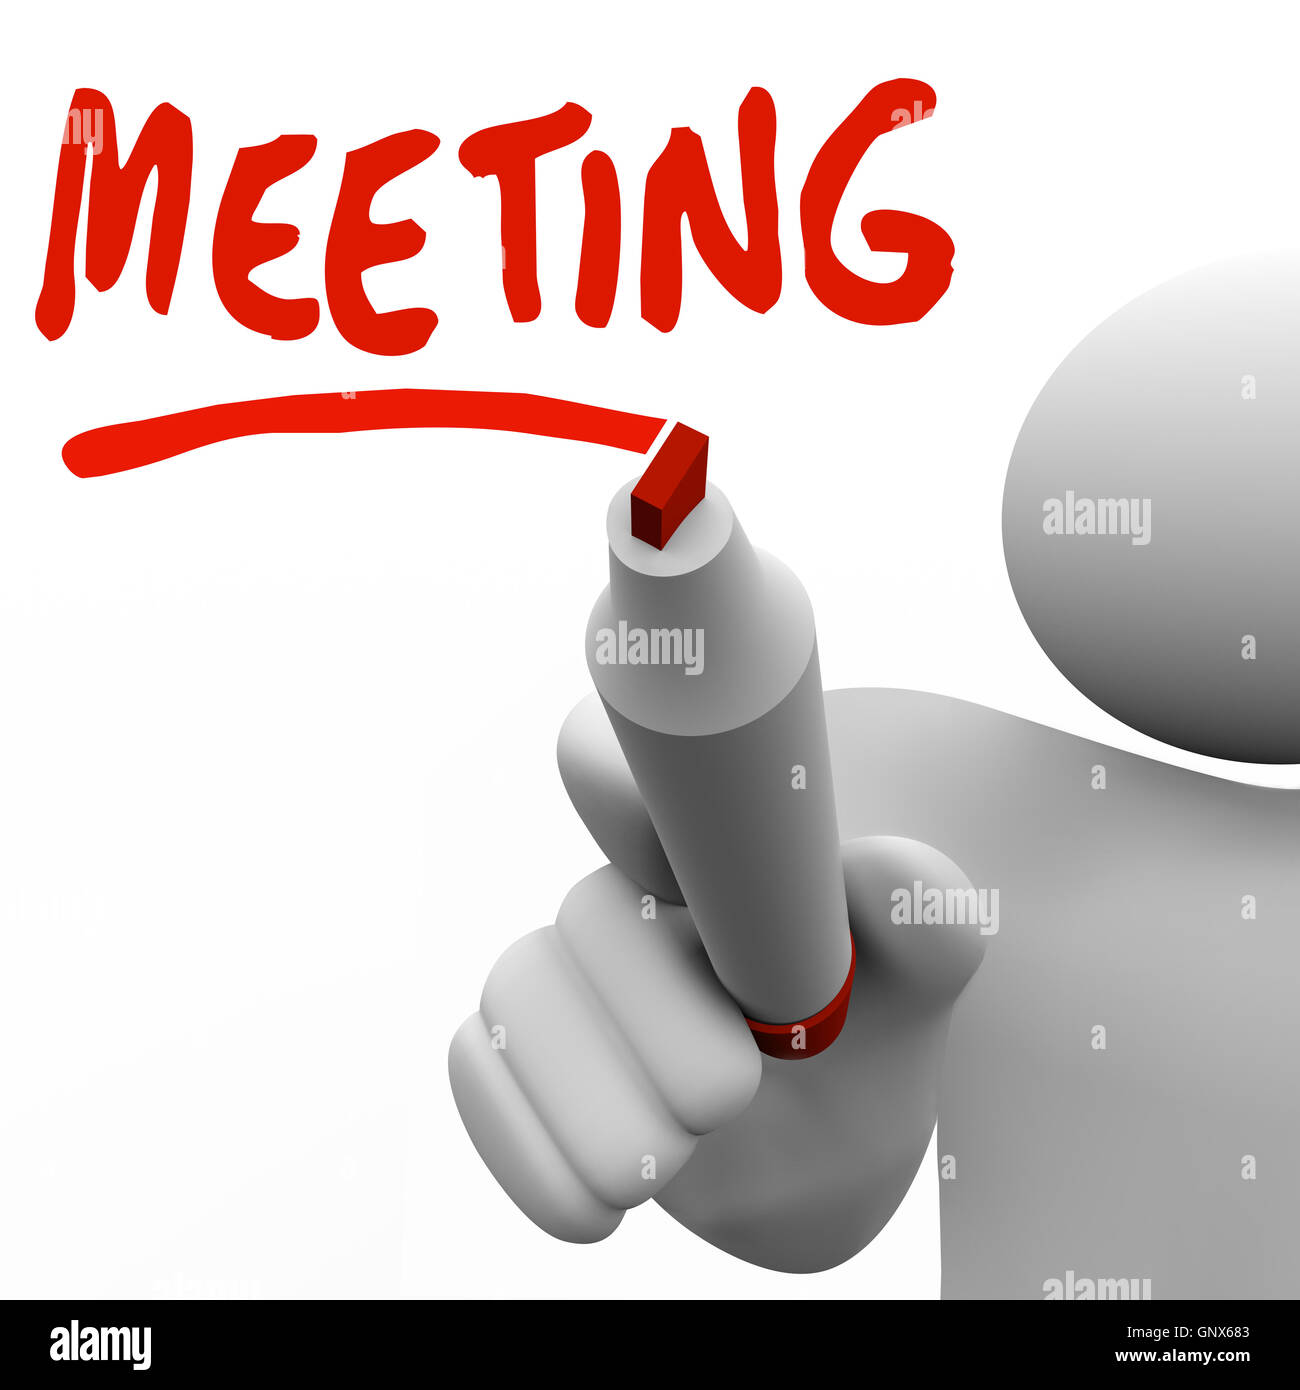 Meeting Word Man Writing on Board Discussion Meet Up Stock Photo